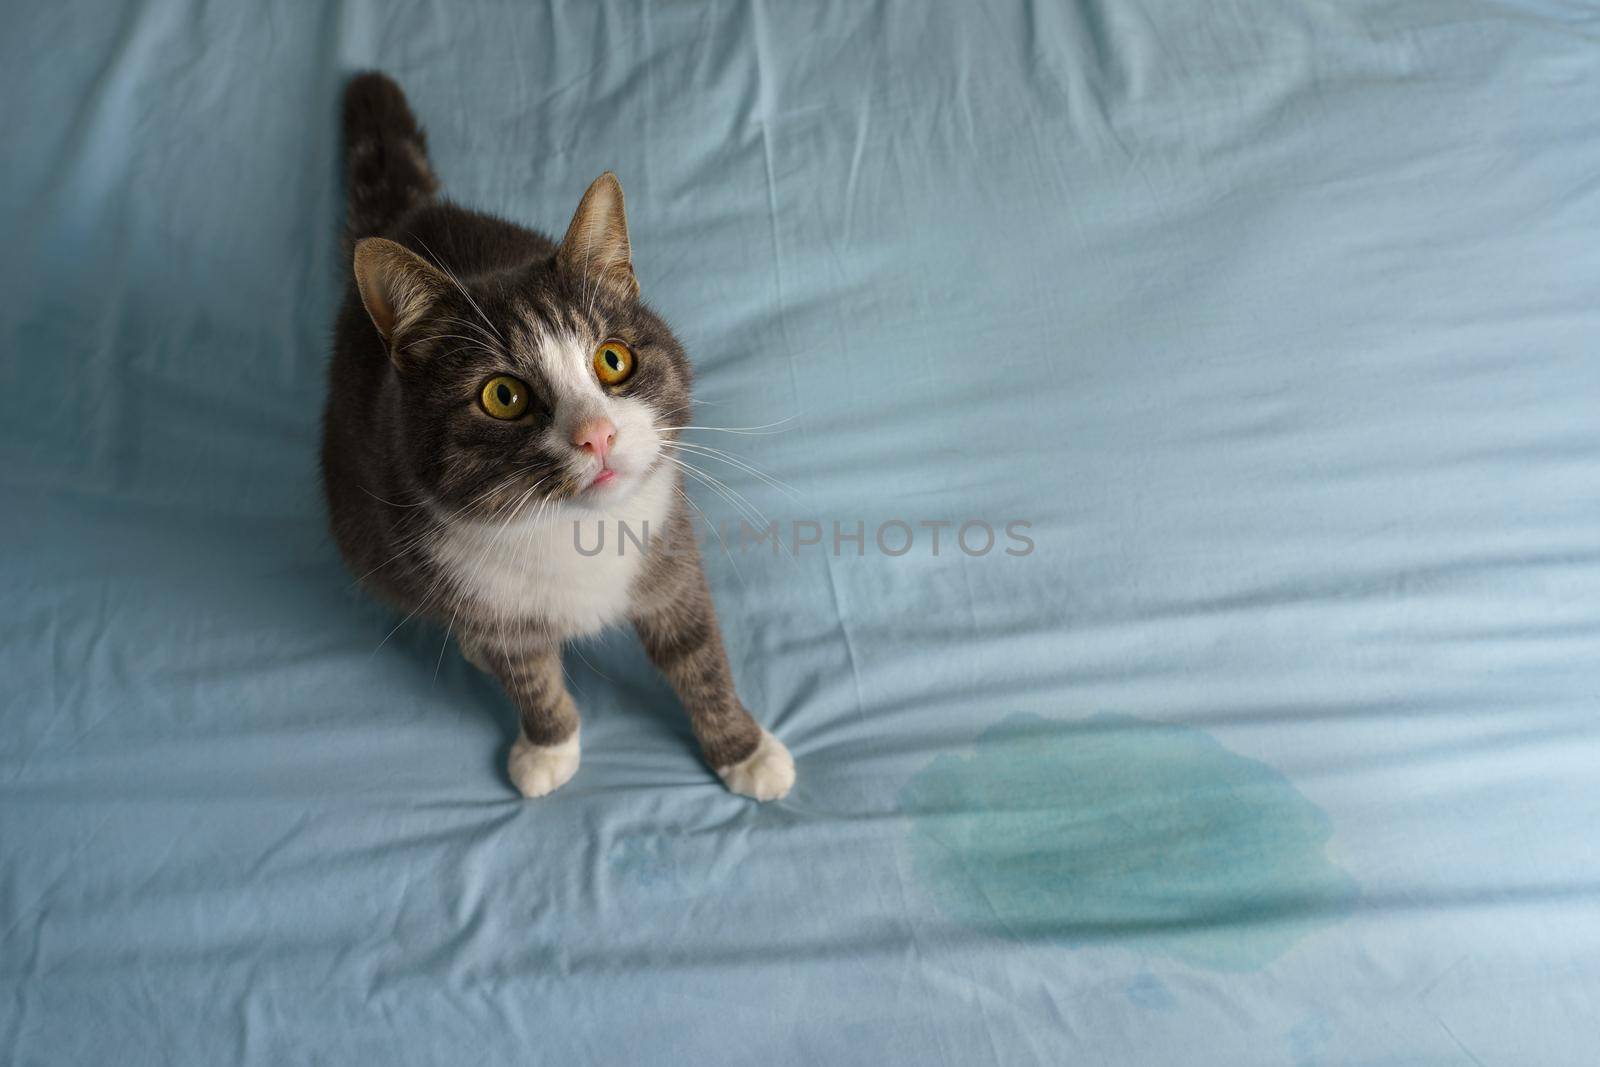 Domestic cat sitting near wet or piss spot on the bed. Cat peeing or urinating on bed by DariaKulkova